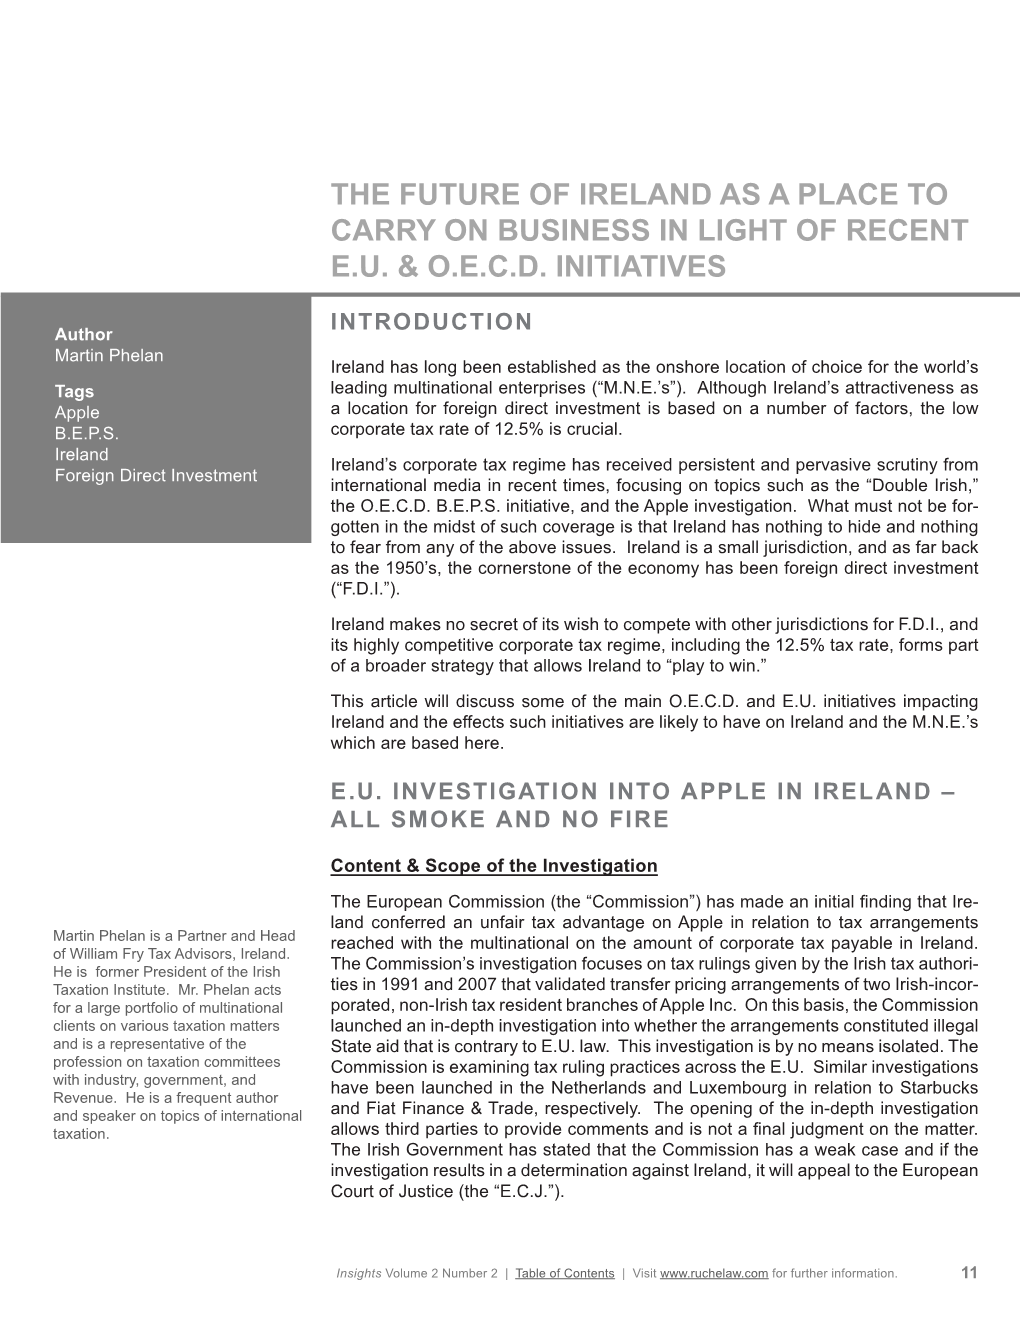 The Future of Ireland As a Place to Carry on Business in Light of Recent E.U